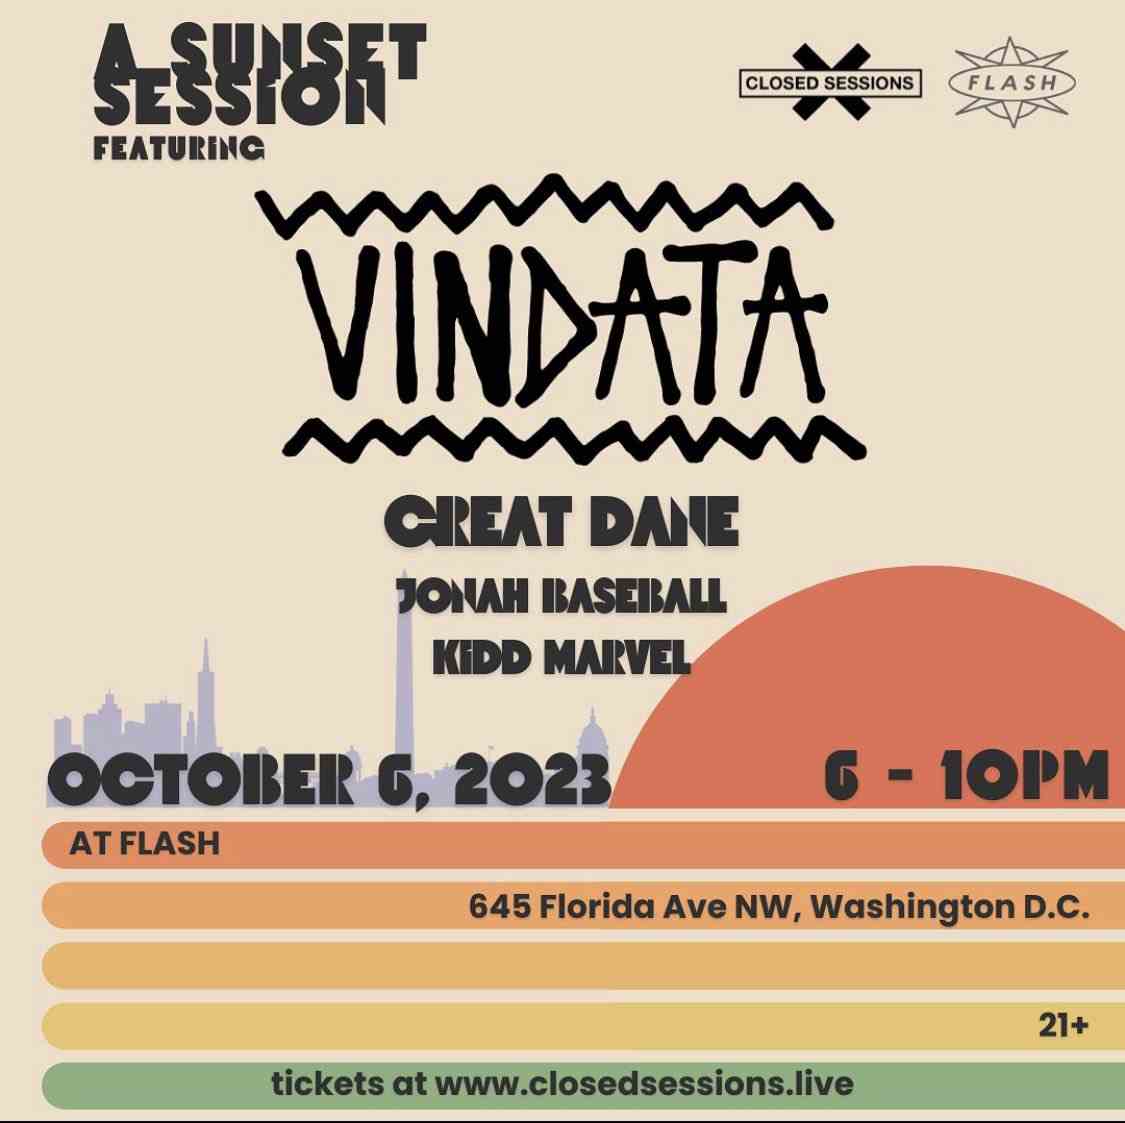 A Sunset Session: Vindata - Great Dane (early show) event flyer